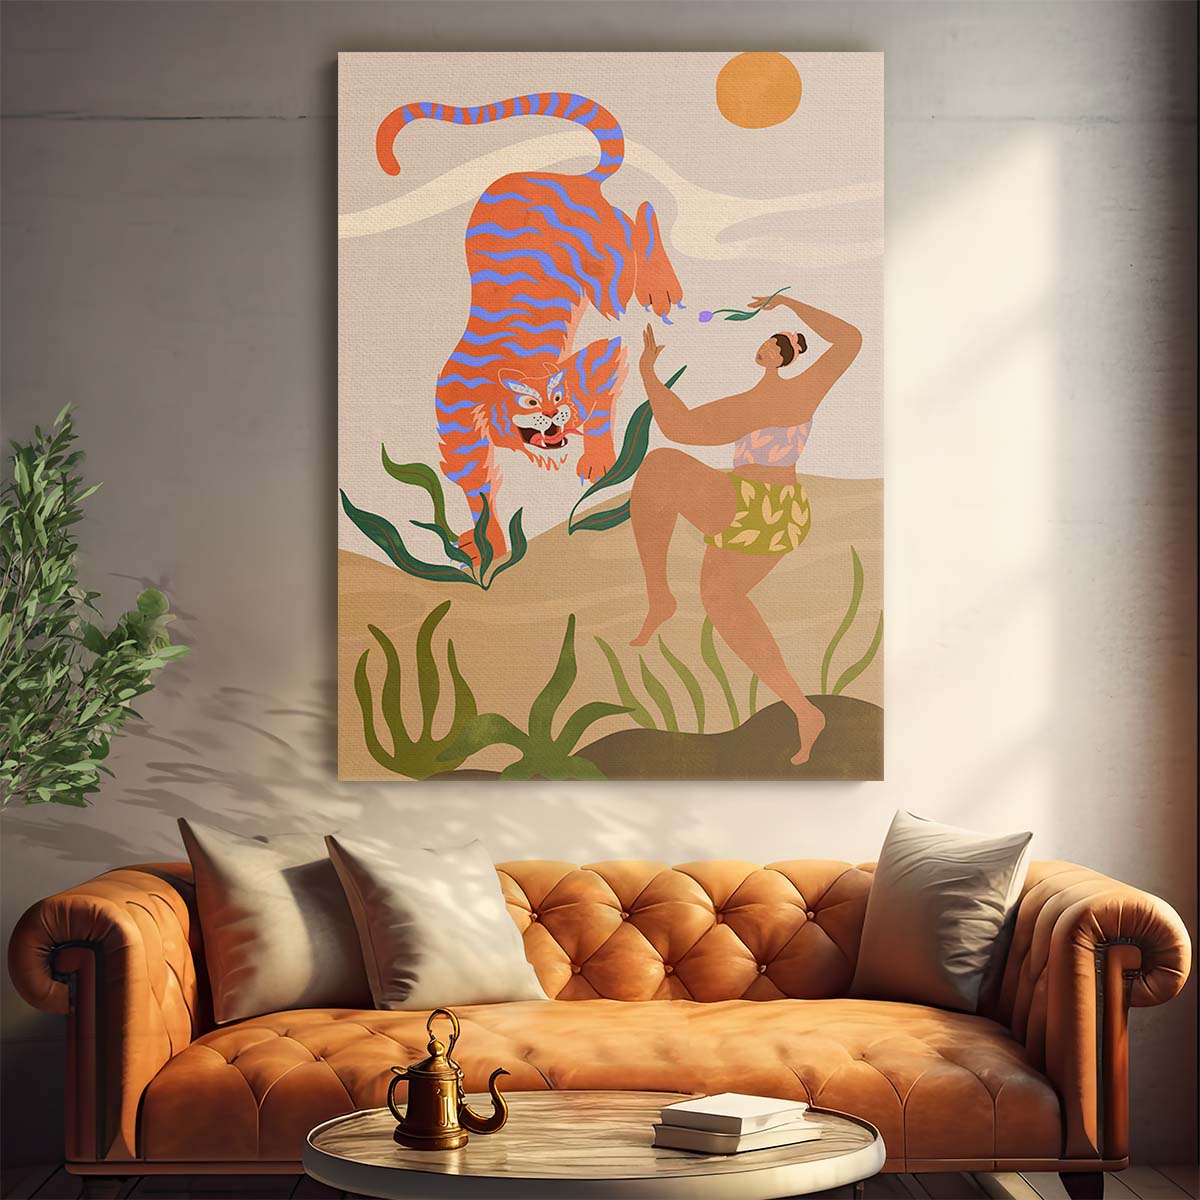 Colorful Dancing Woman with Tiger Illustration, Botanical Boho Art by Luxuriance Designs, made in USA